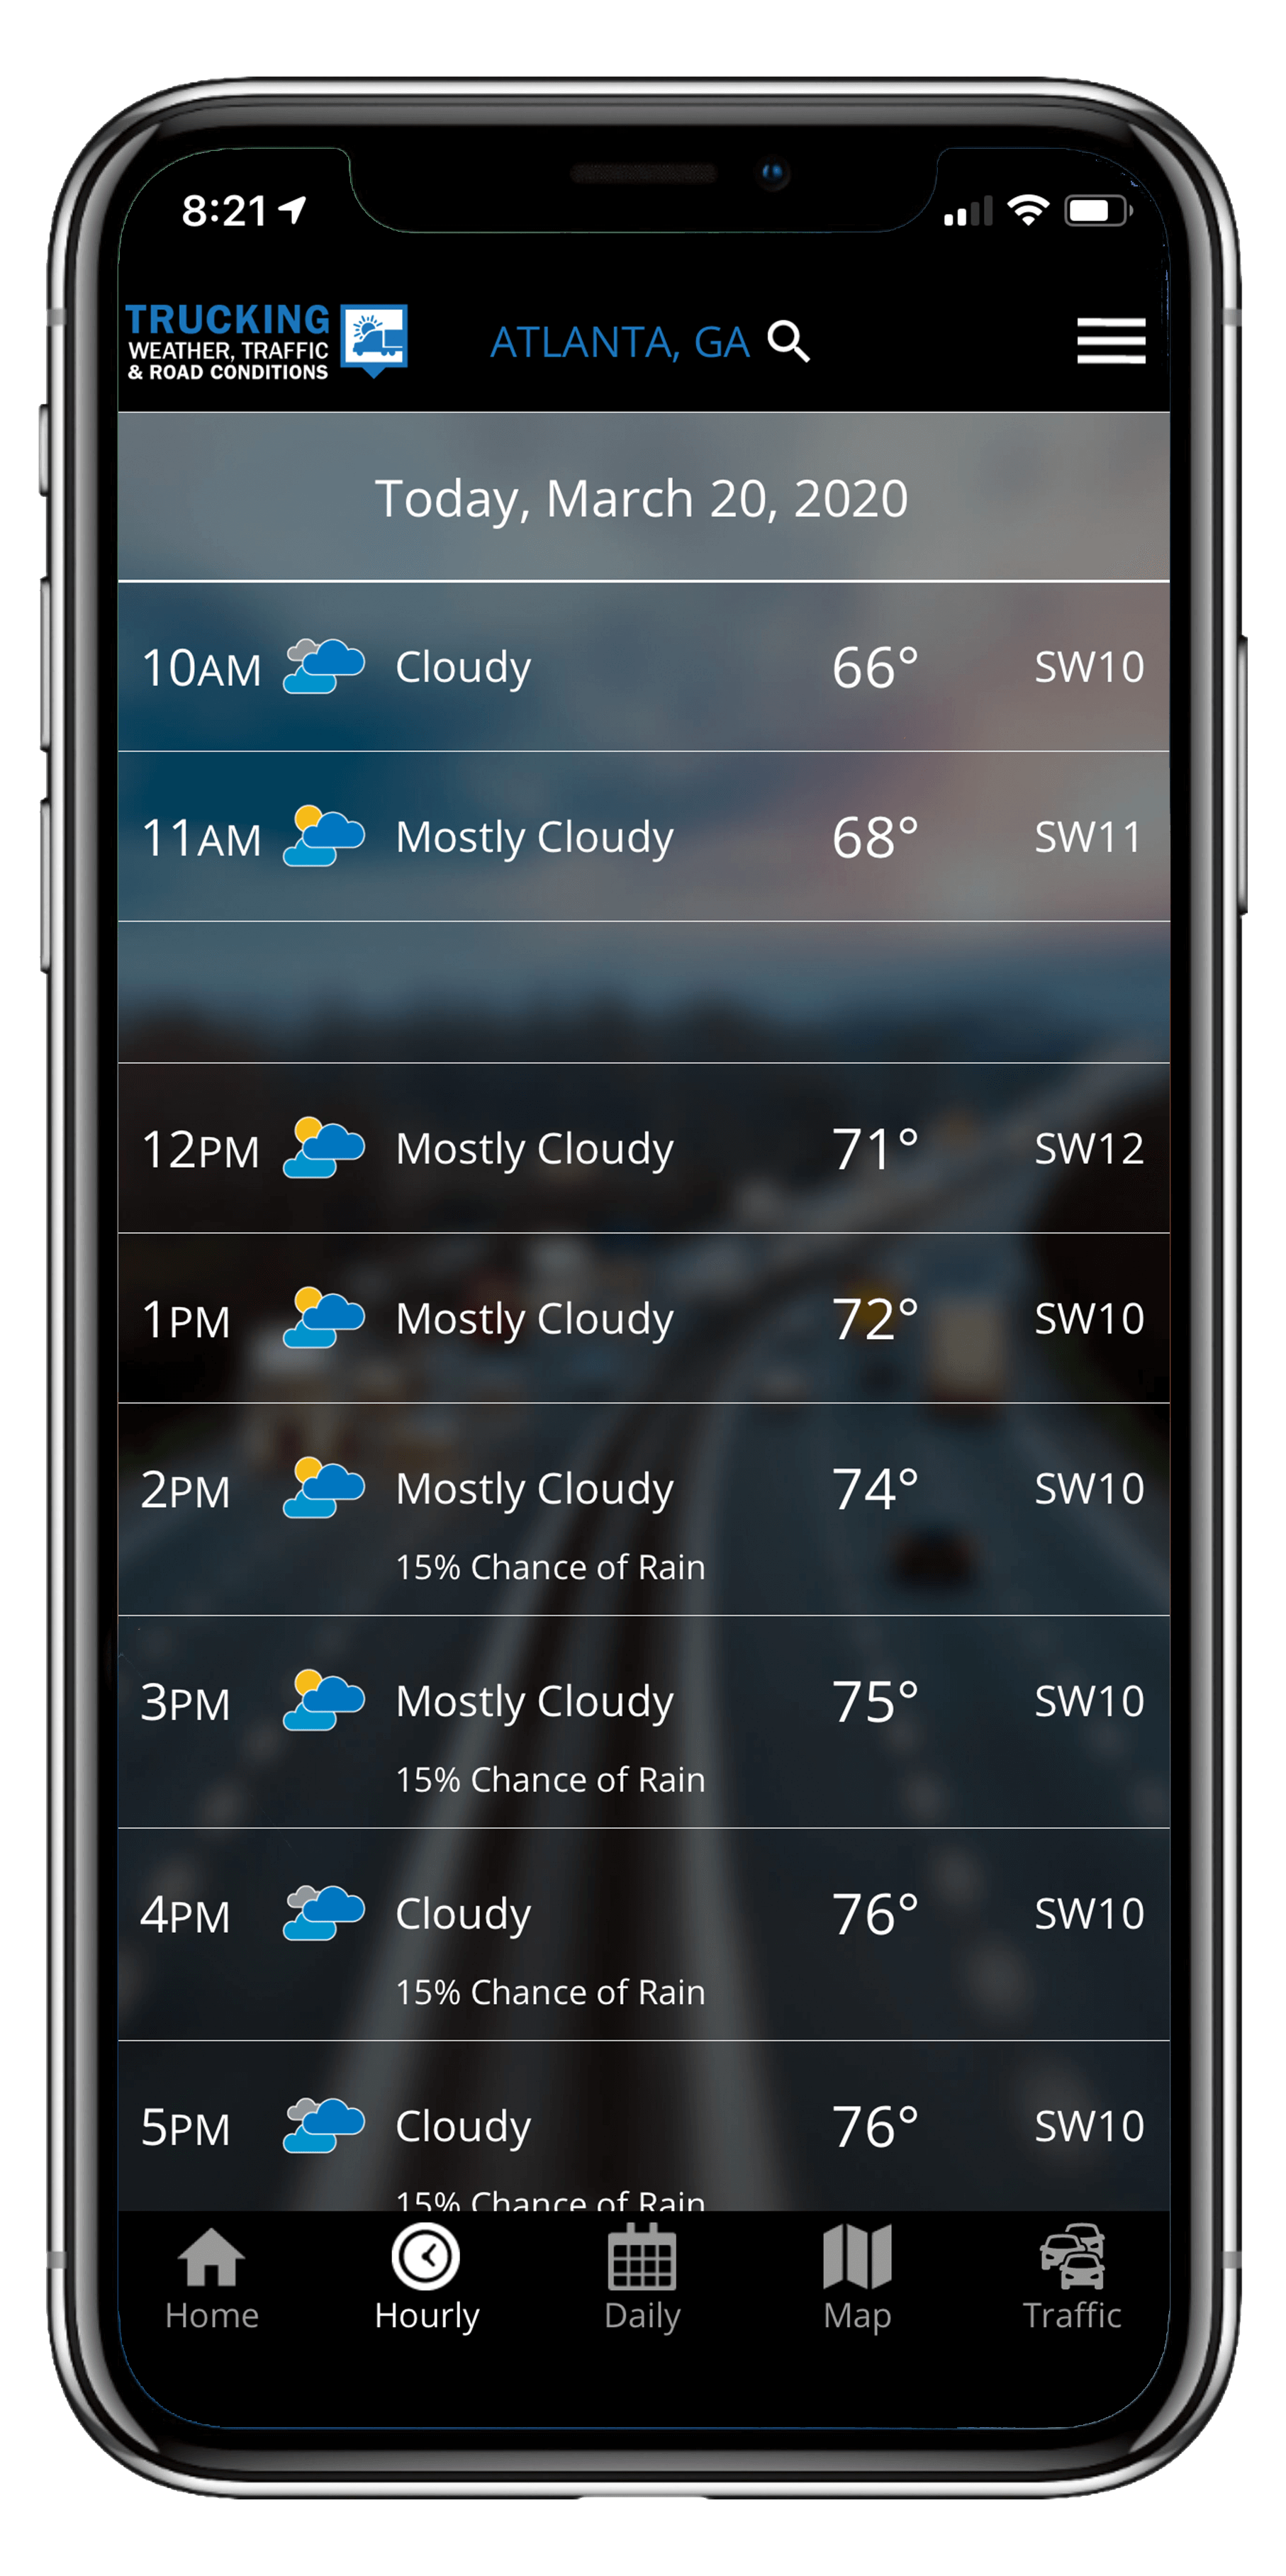 truck-weather-app_forecasts.png